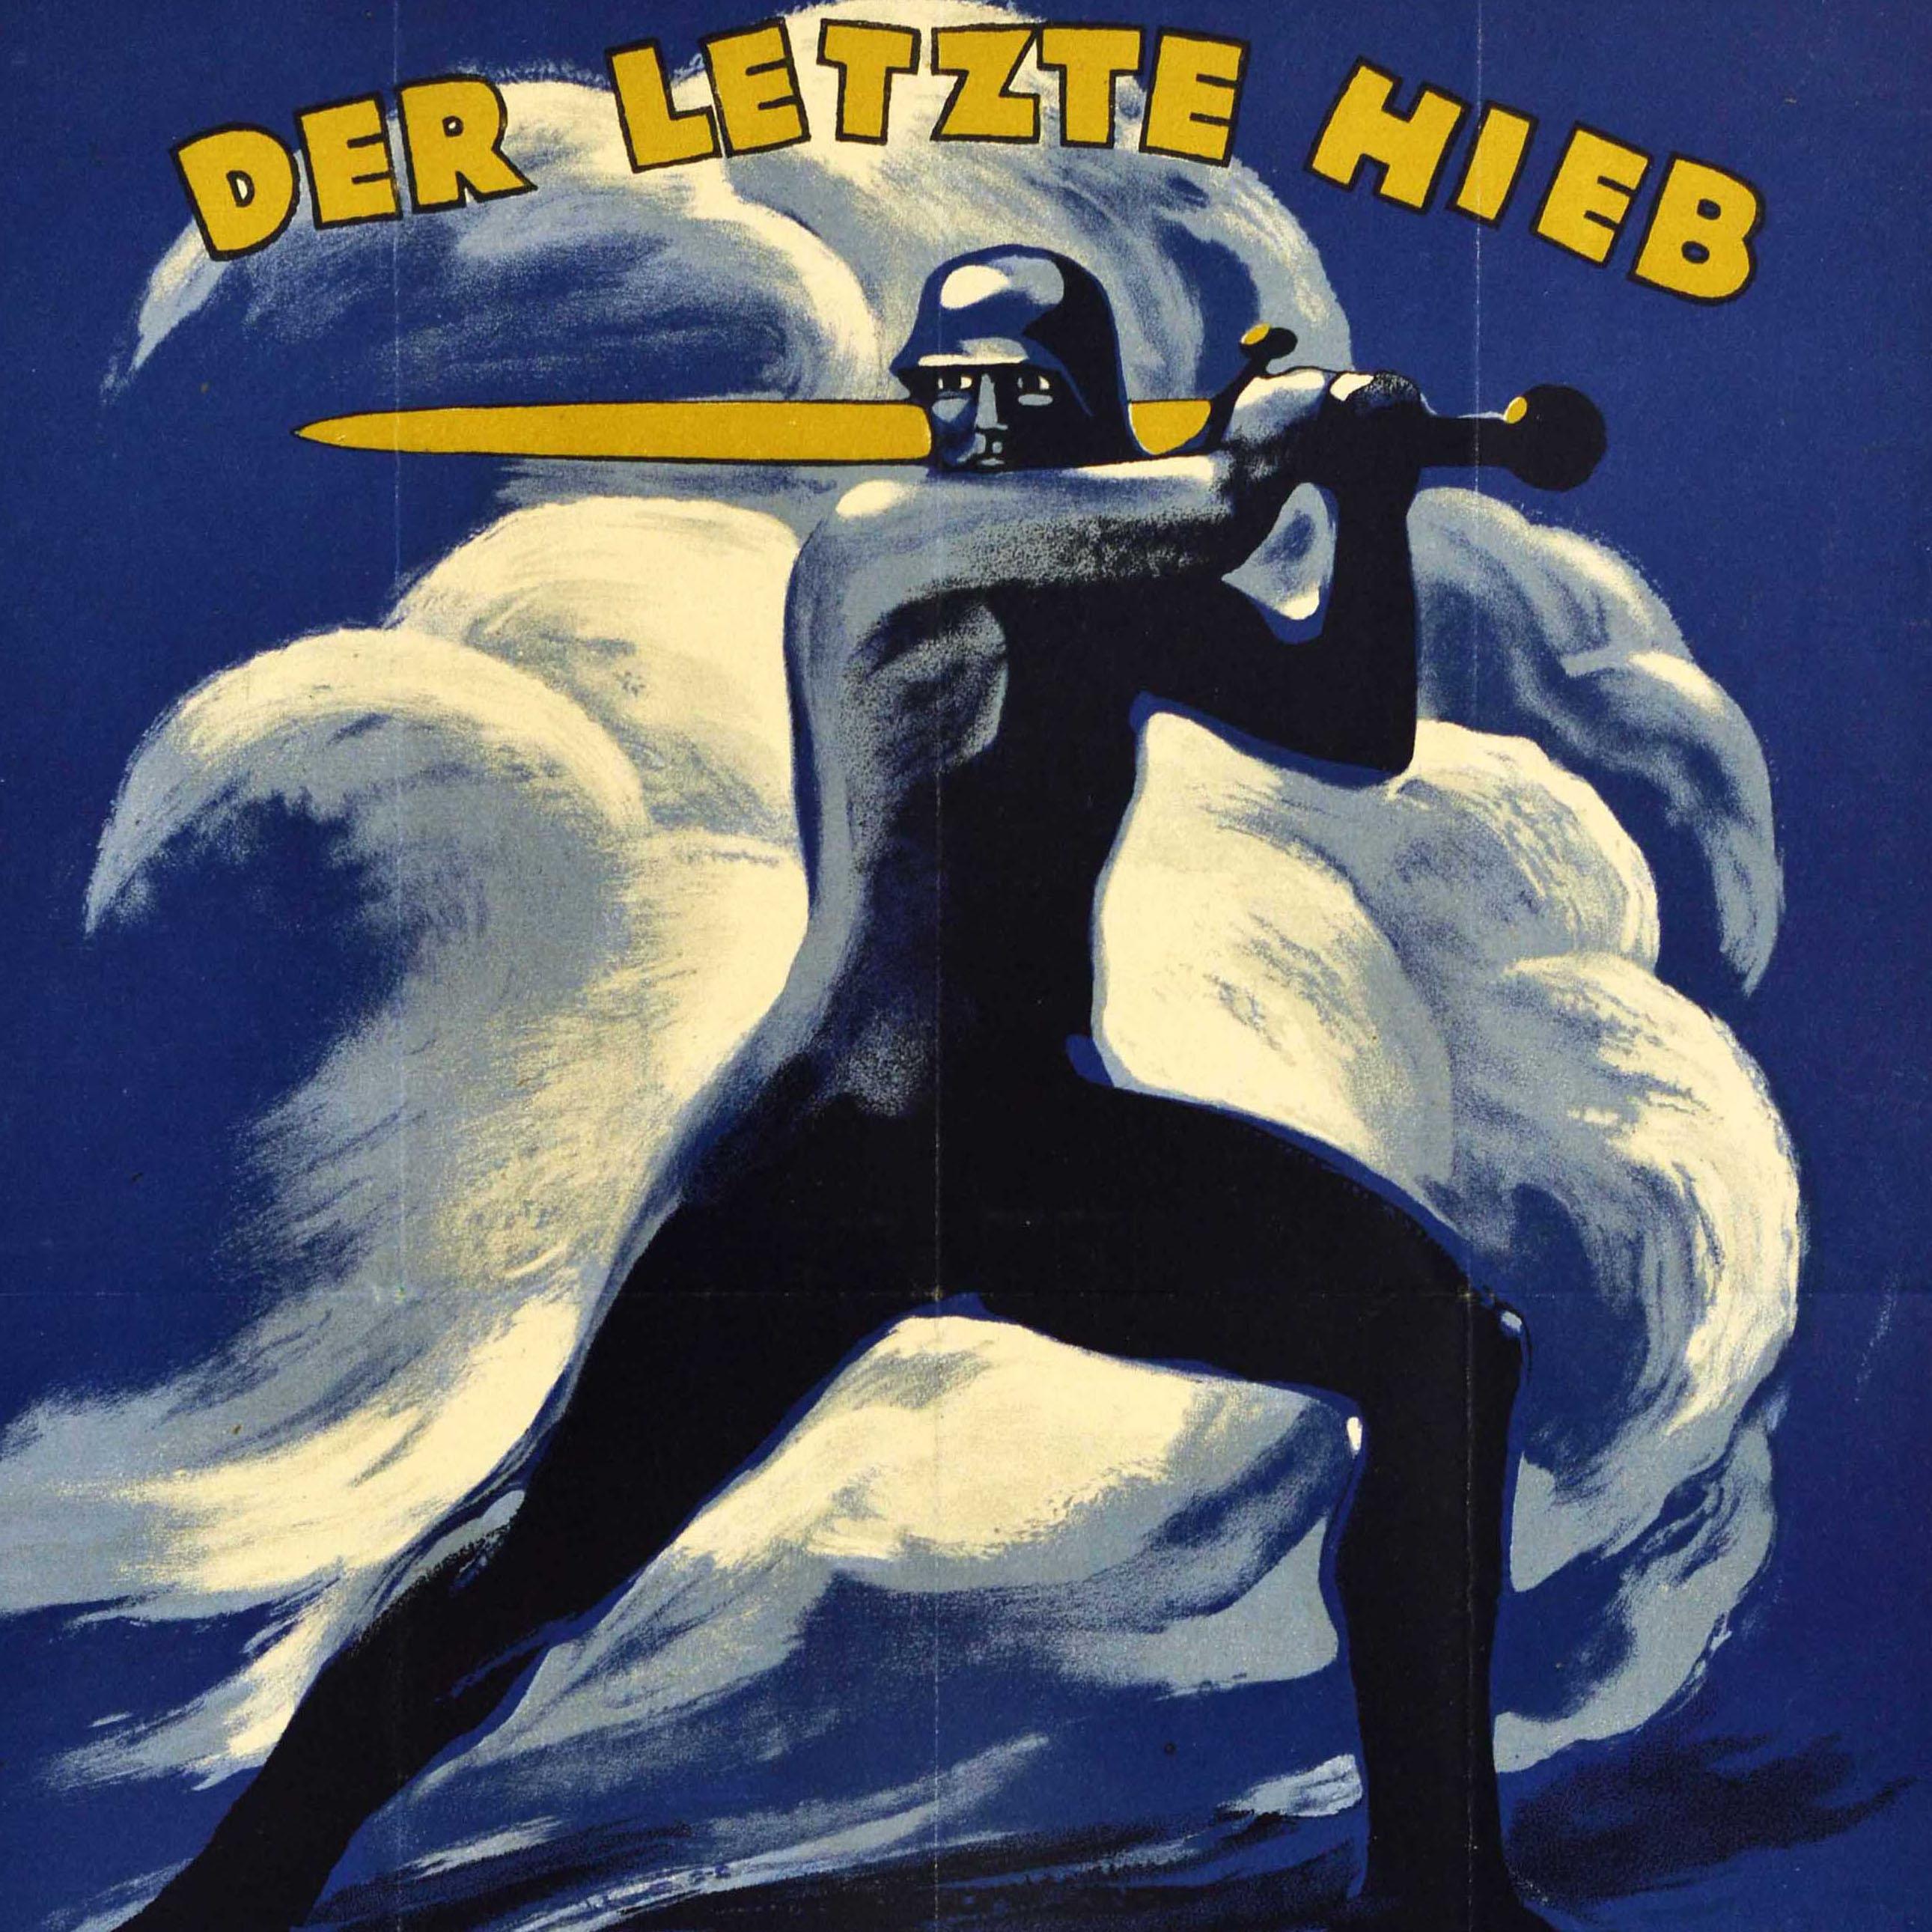 Original antique World War One poster - Der letzte Hieb ist die 8. Kriegsanleihe / The last blow is the 8th War Loan - featuring a dynamic image on a blue background depicting a soldier wearing a helmet swinging a large sword with white clouds